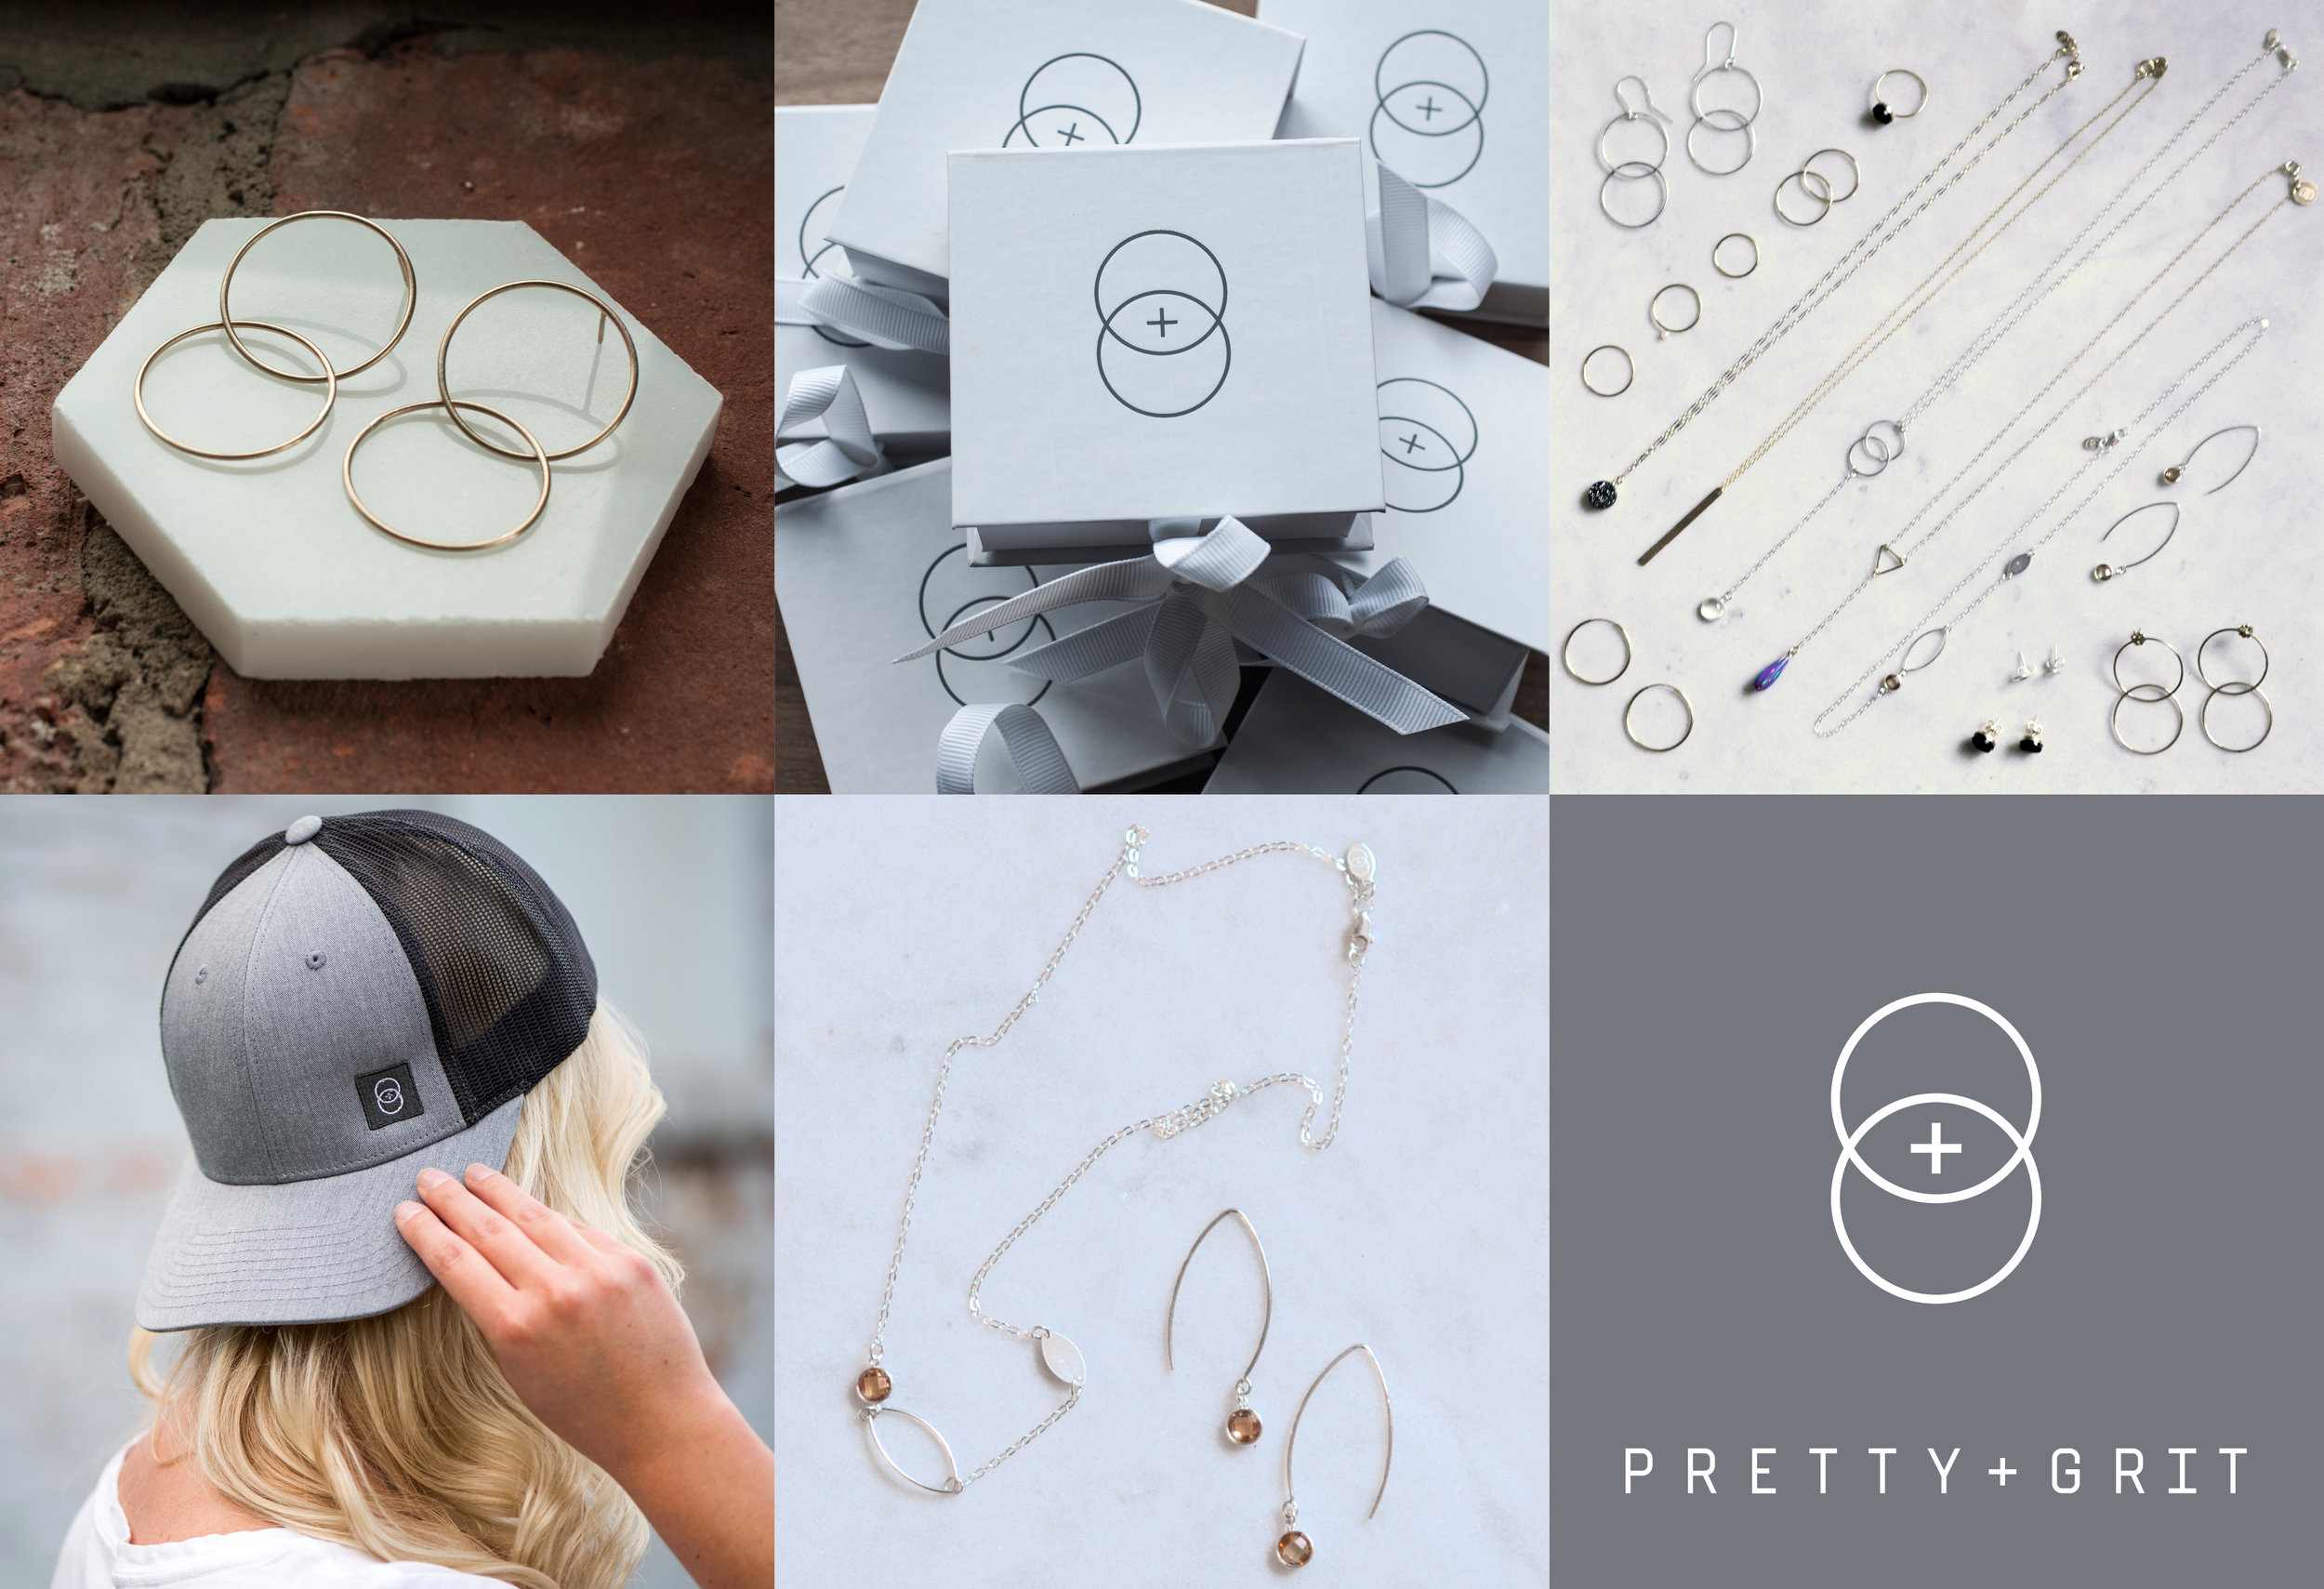 Pretty and Grit Brand Strategy, Identity, Packaging, Merch, and Jewelry Design